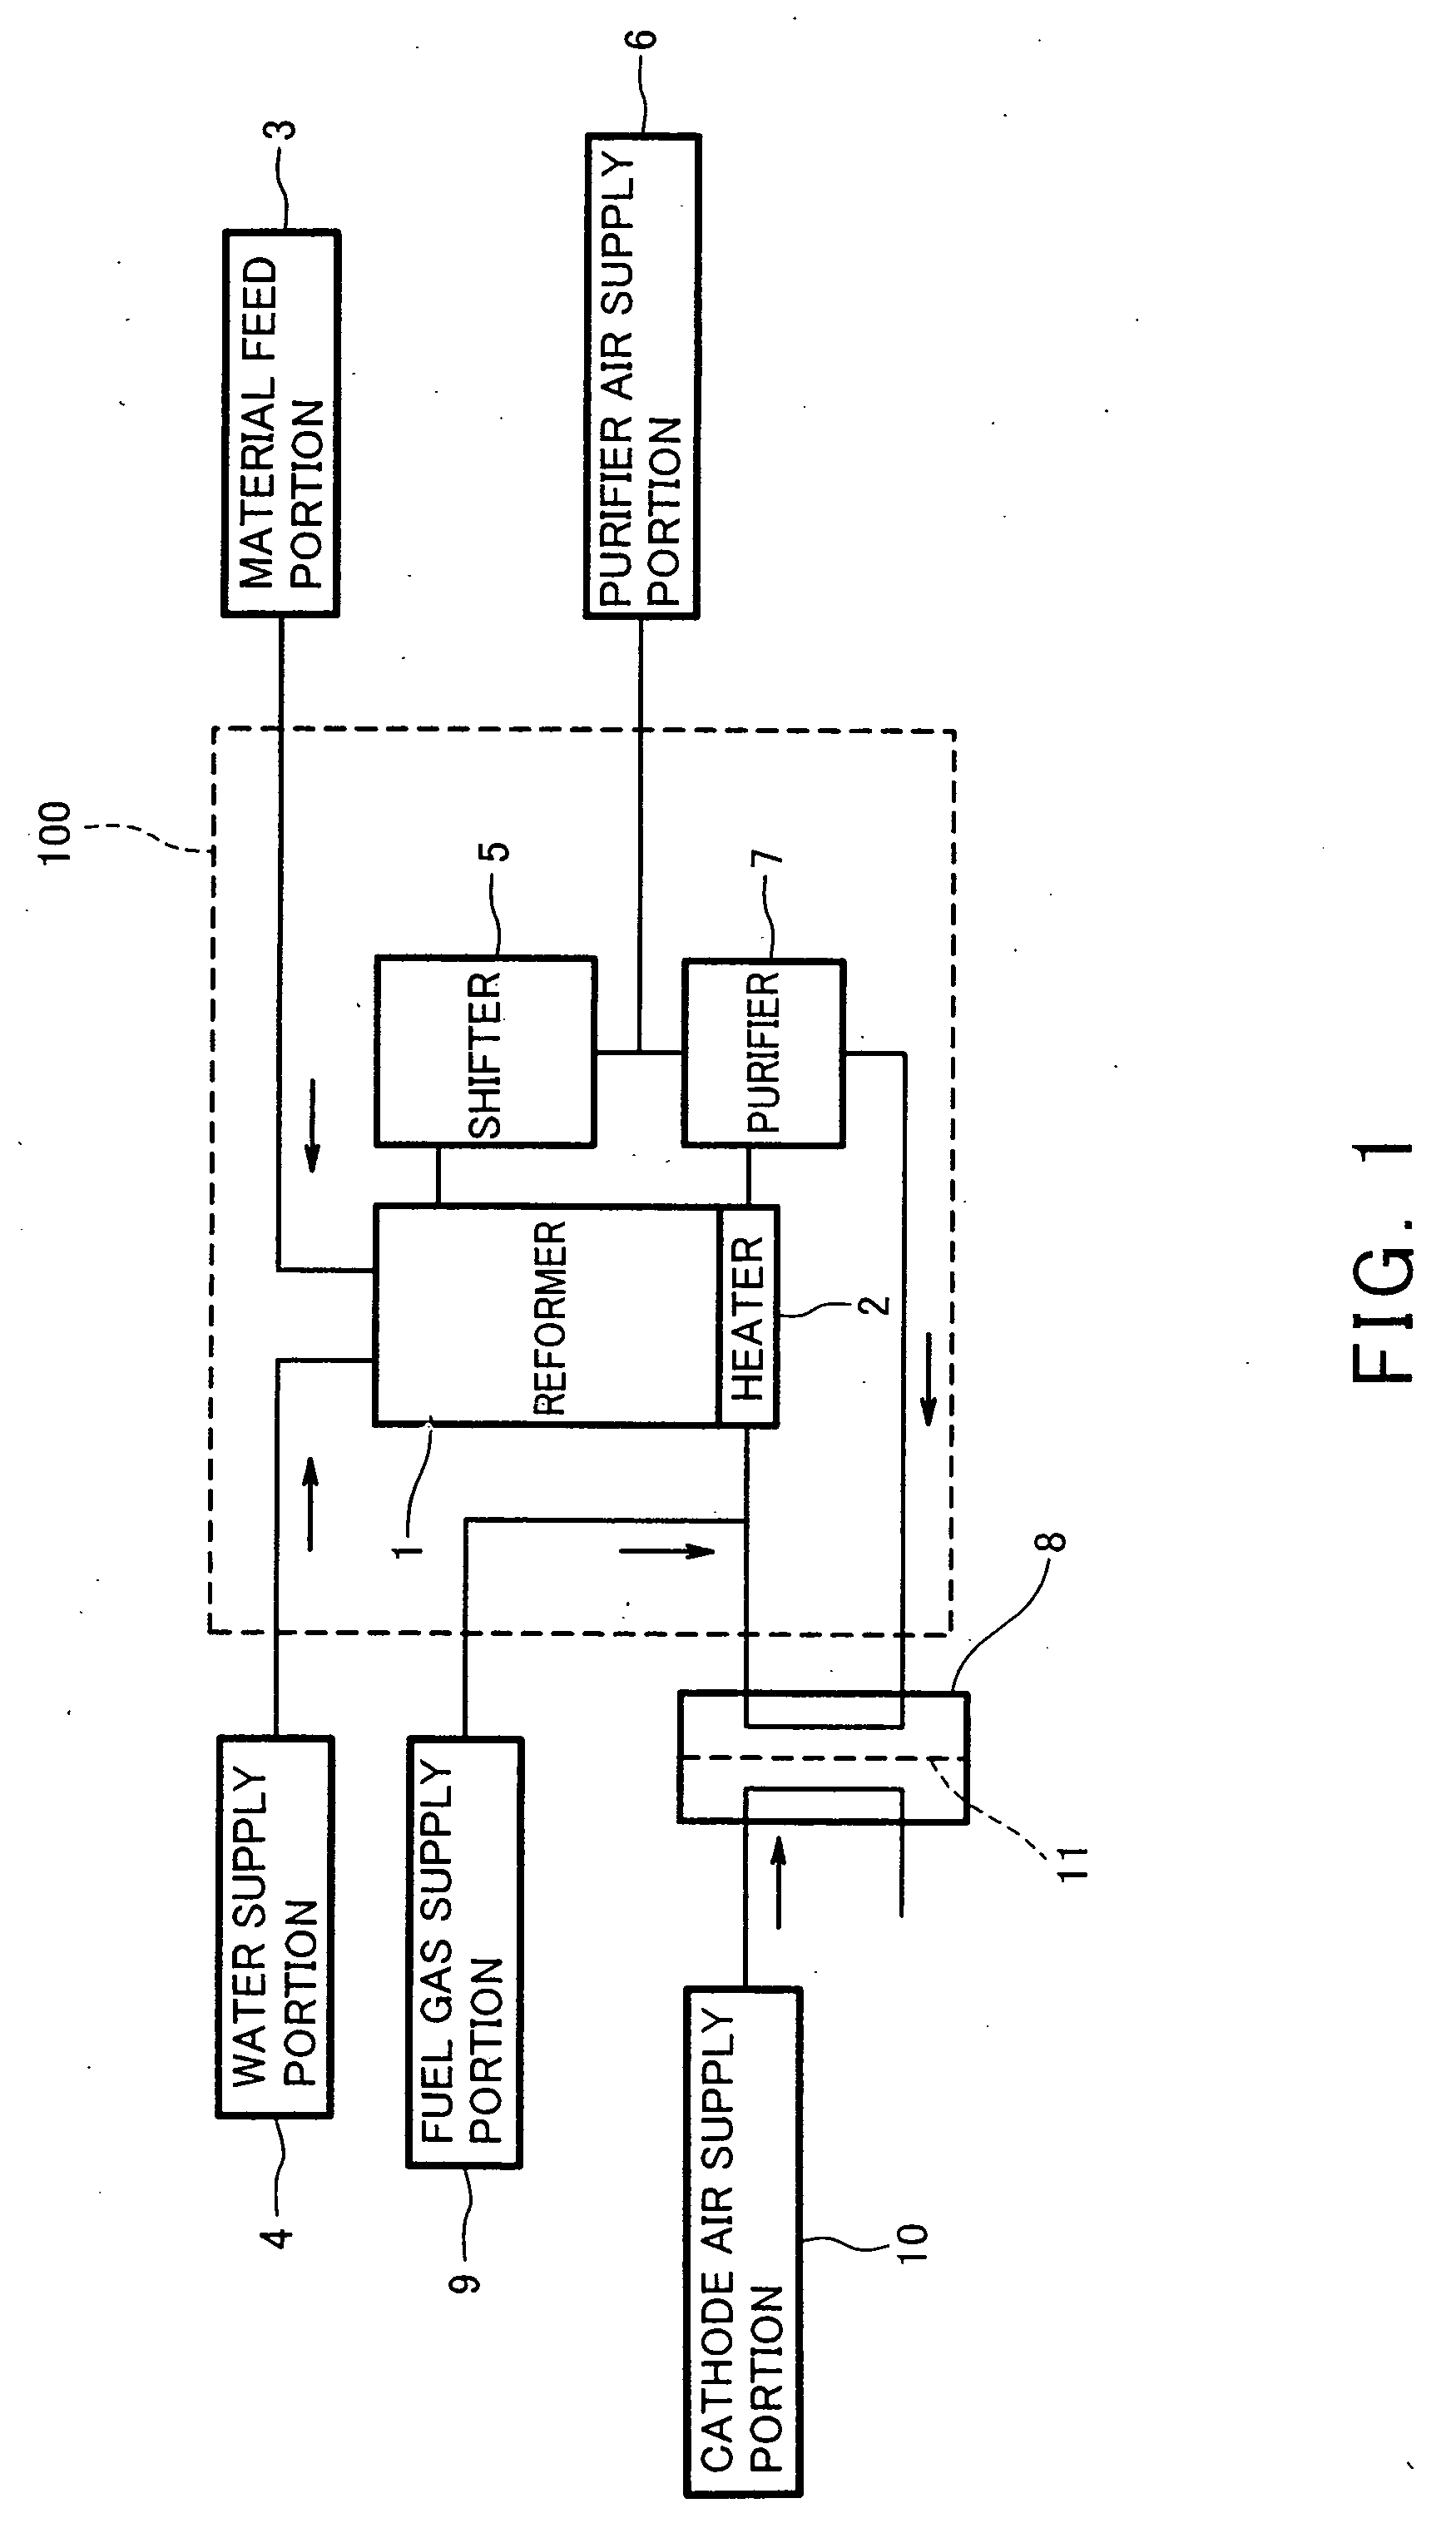 Hydrogen generator and fuel cell system